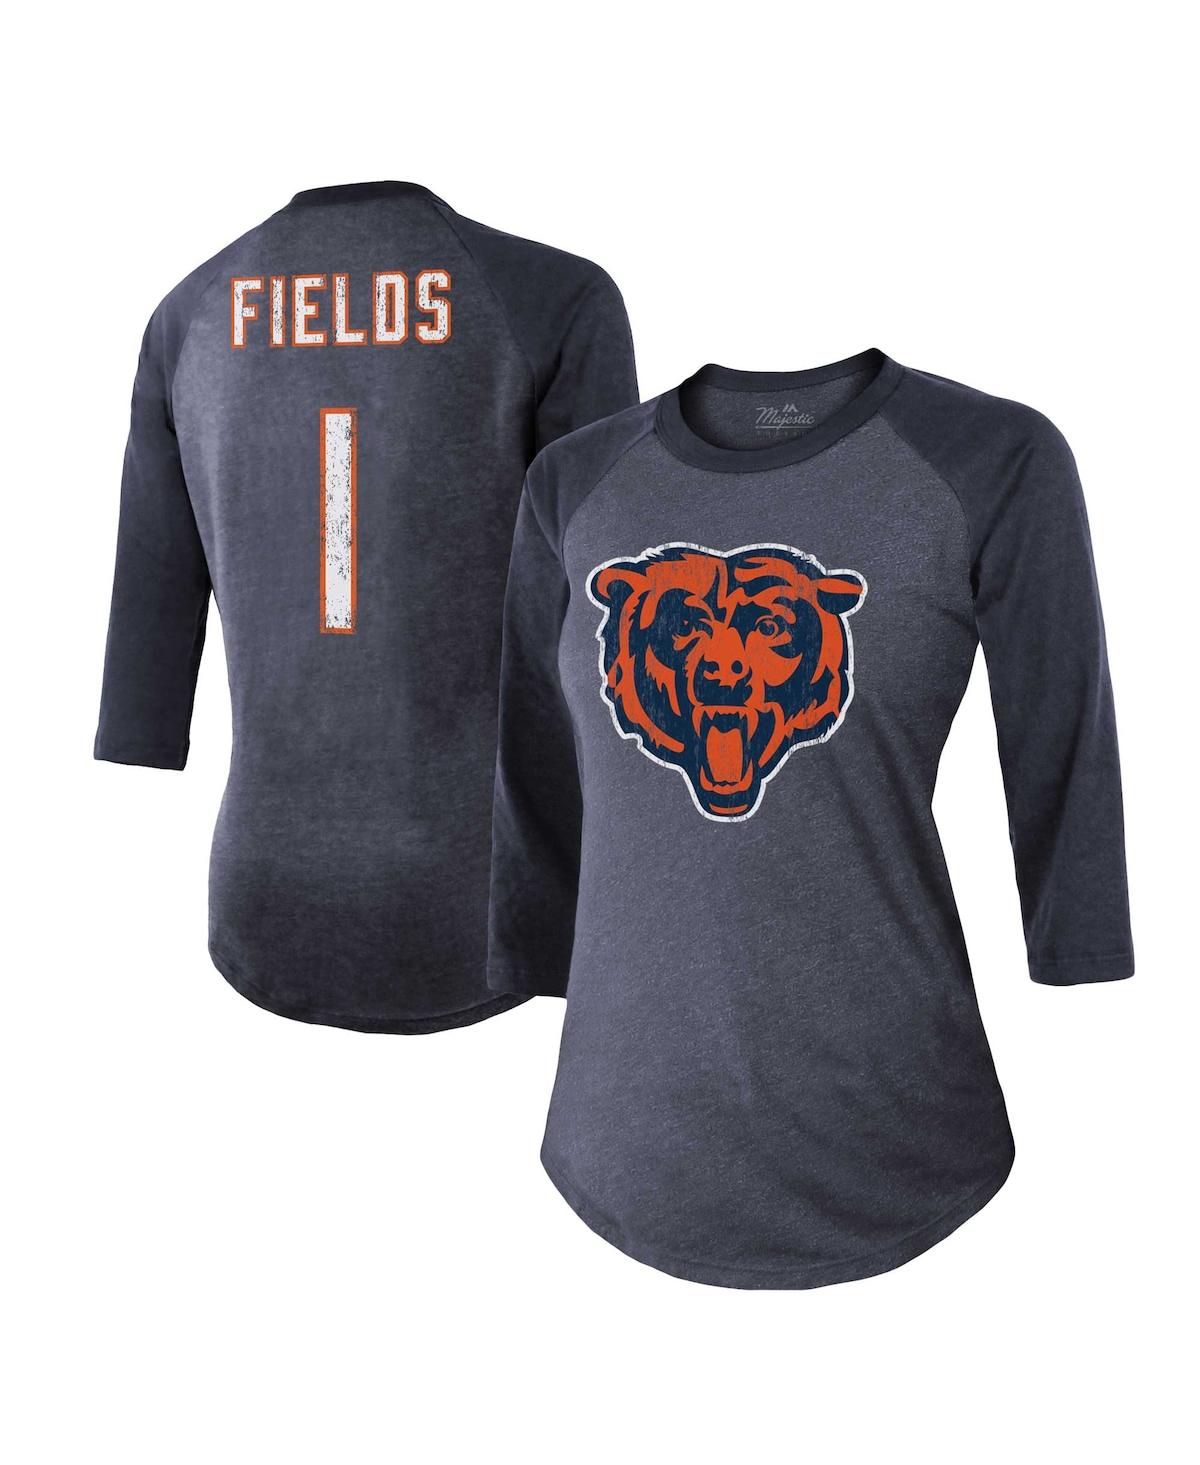 Women's Majestic Threads Justin Fields Navy Distressed Chicago Bears Player Name and Number Tri-Blend 3/4-Sleeve Fitted T-shirt - Navy